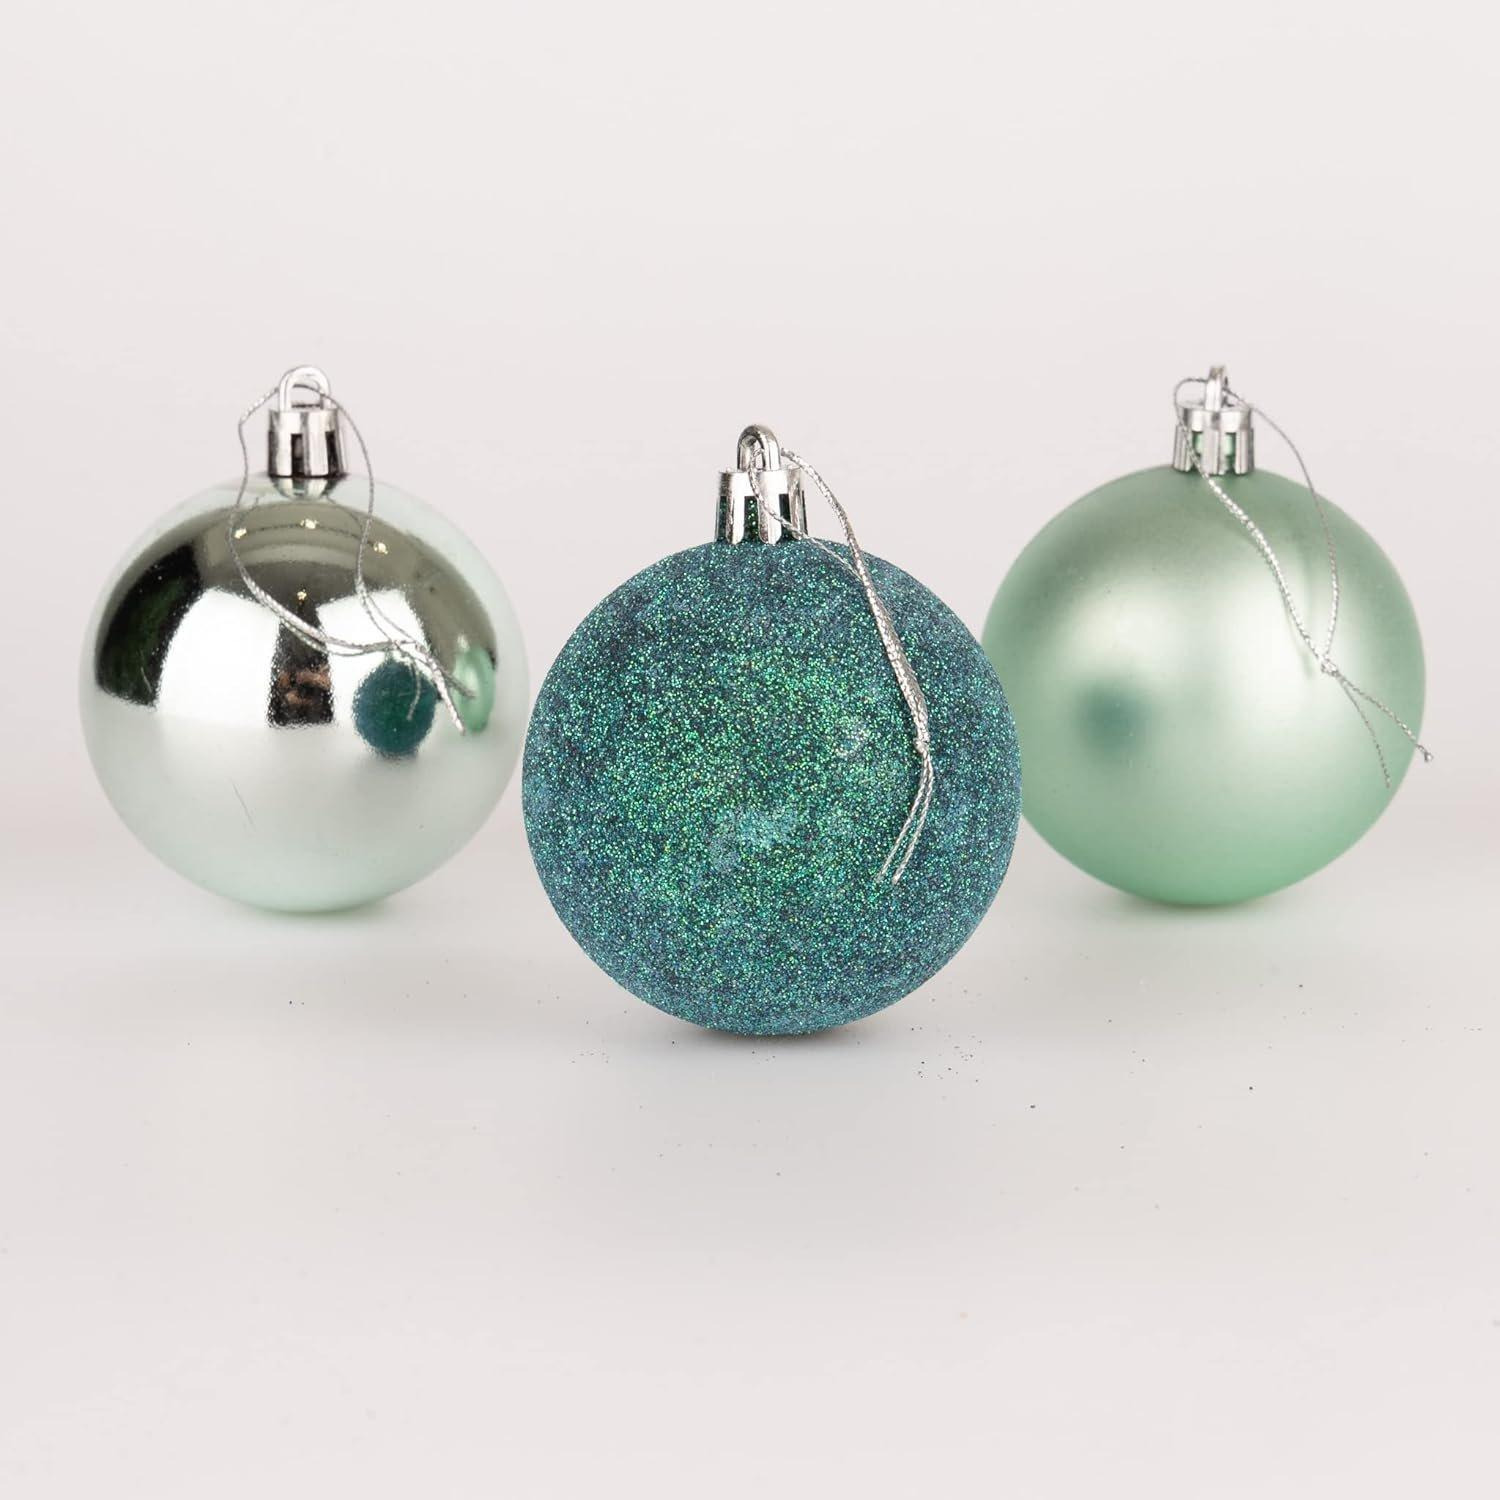 60mm/6Pcs Christmas Baubles Shatterproof Turquoise,Tree Decorations - image 1